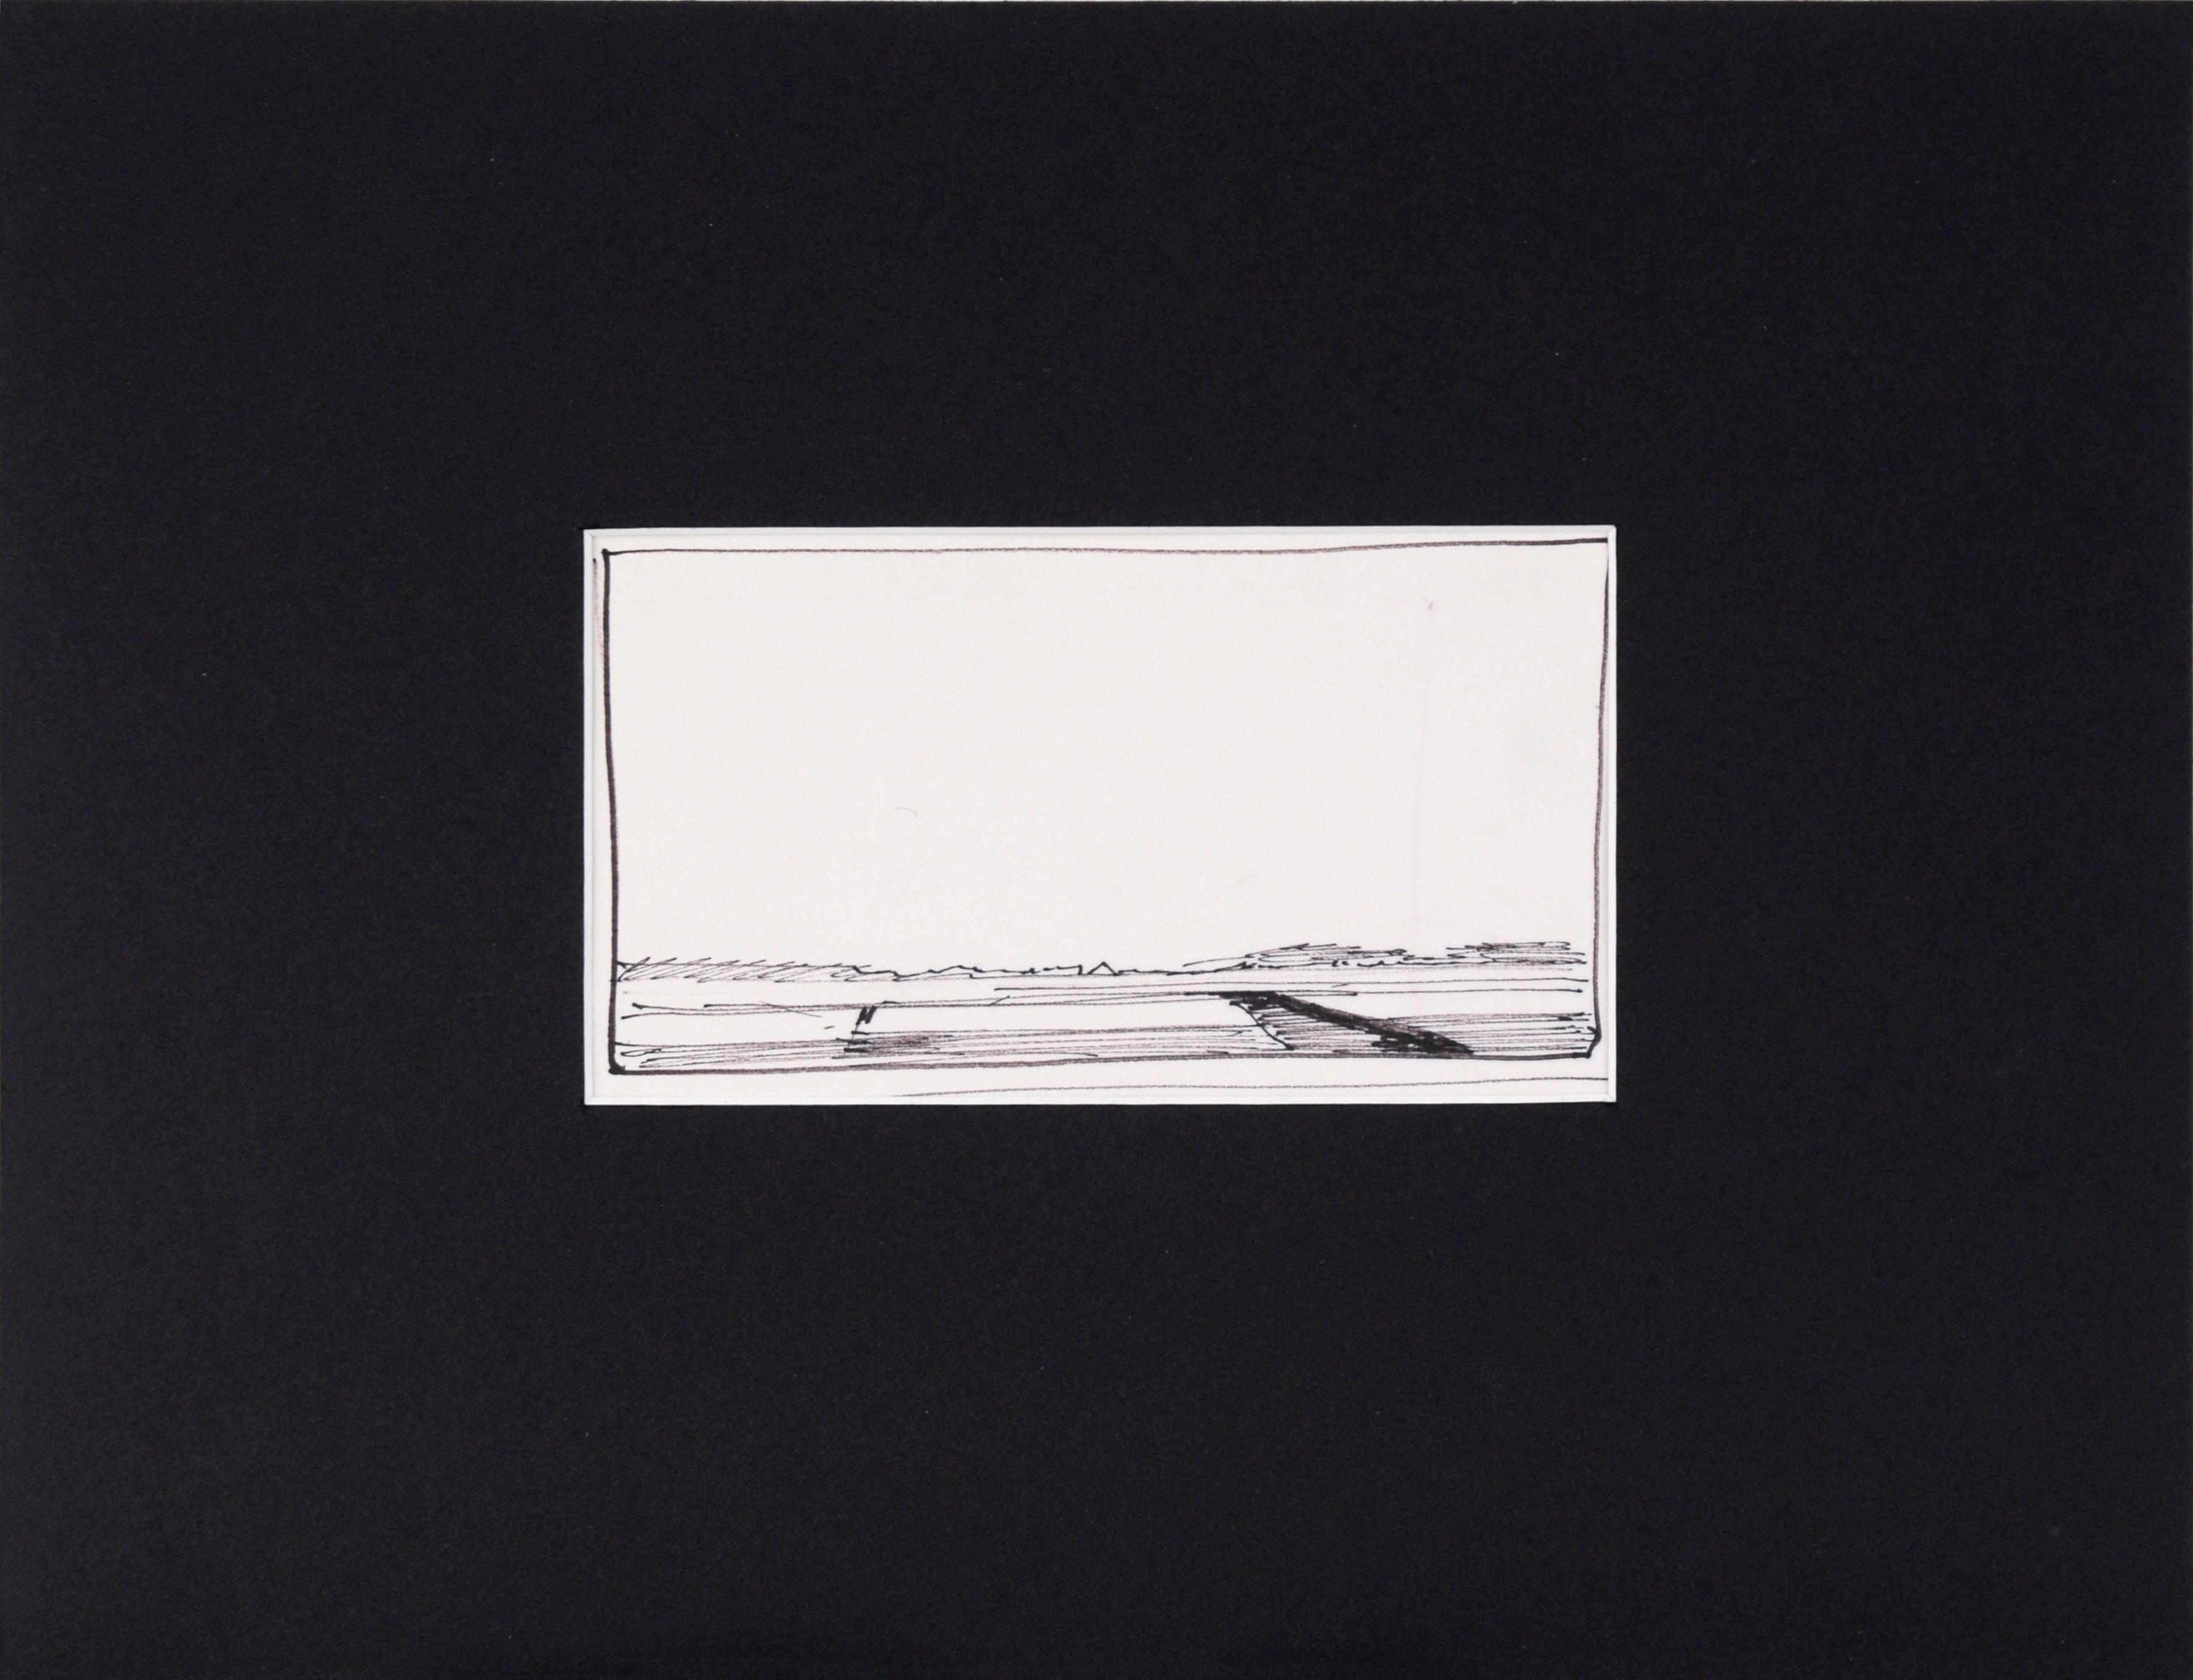 A Cloudless Sky - Line Drawing Landscape in Ink on Paper